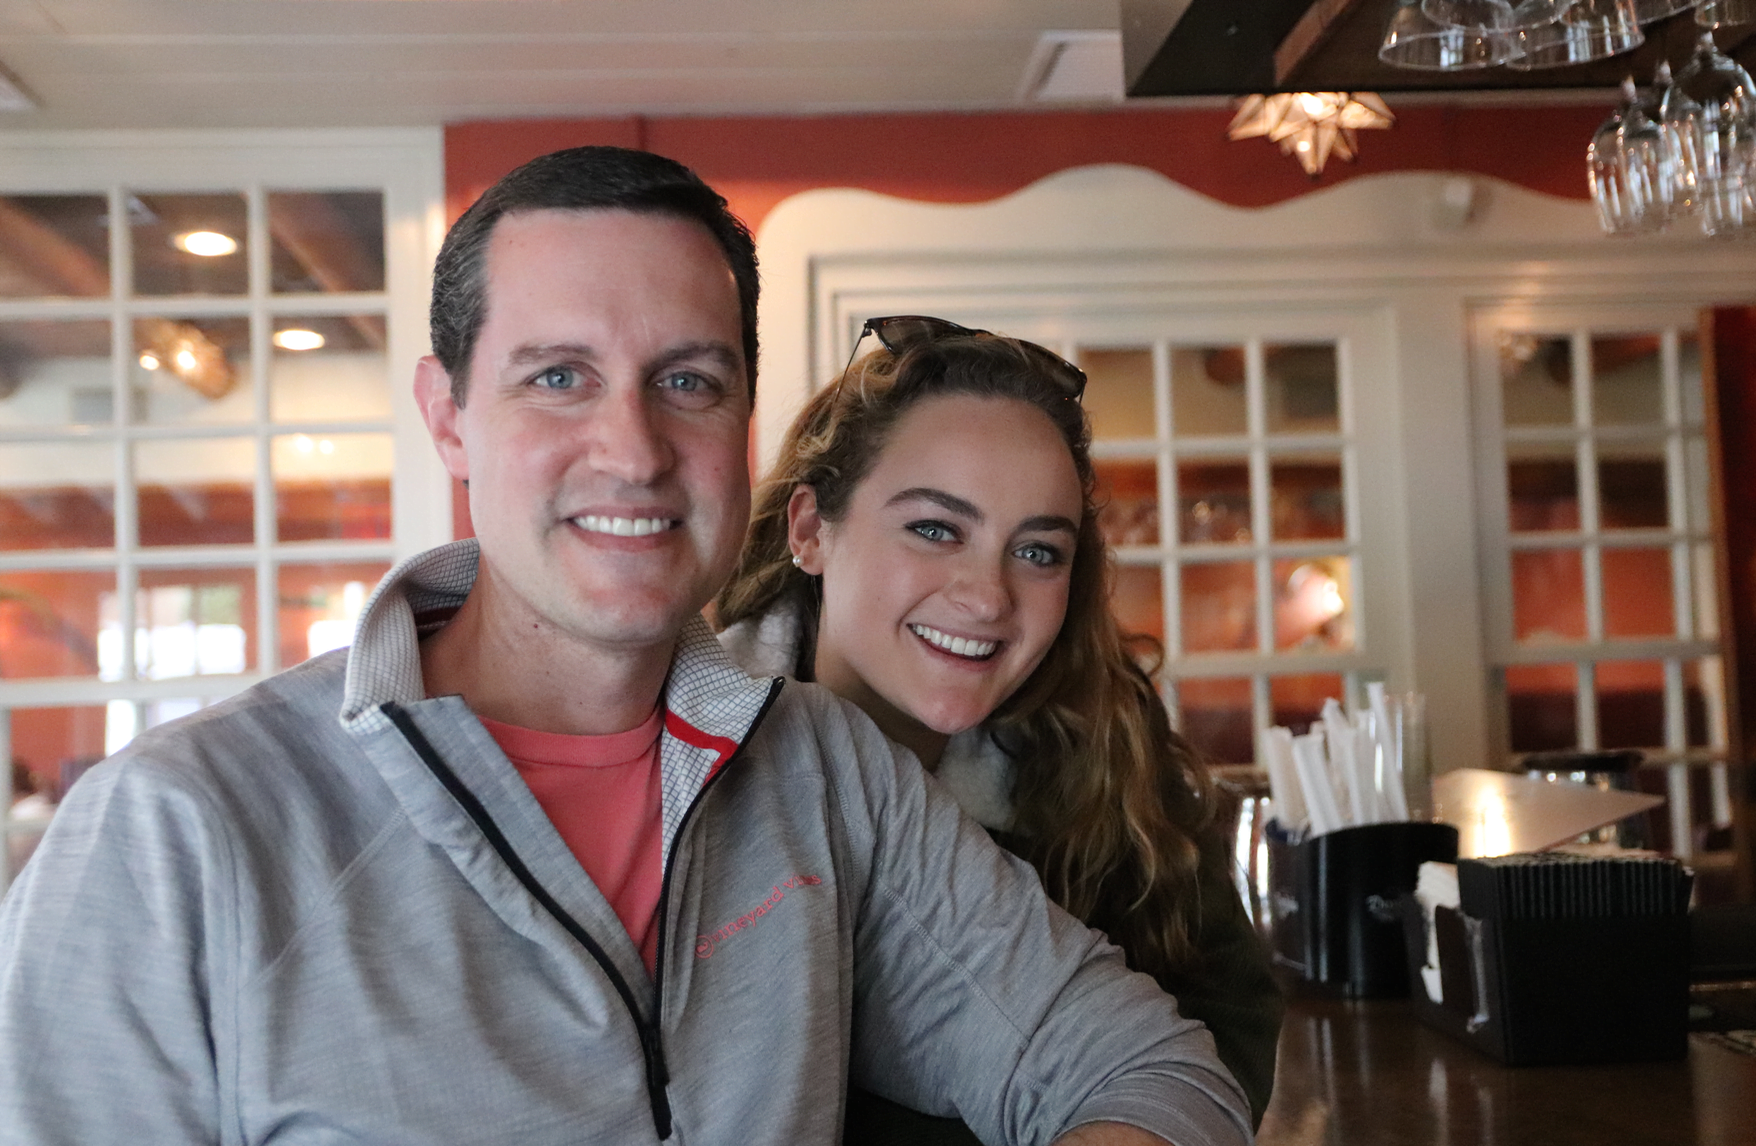 James Farrell and his daughter Katie at Boxcar Cantina. Oct 11, 2019 Photo: Leslie Yager